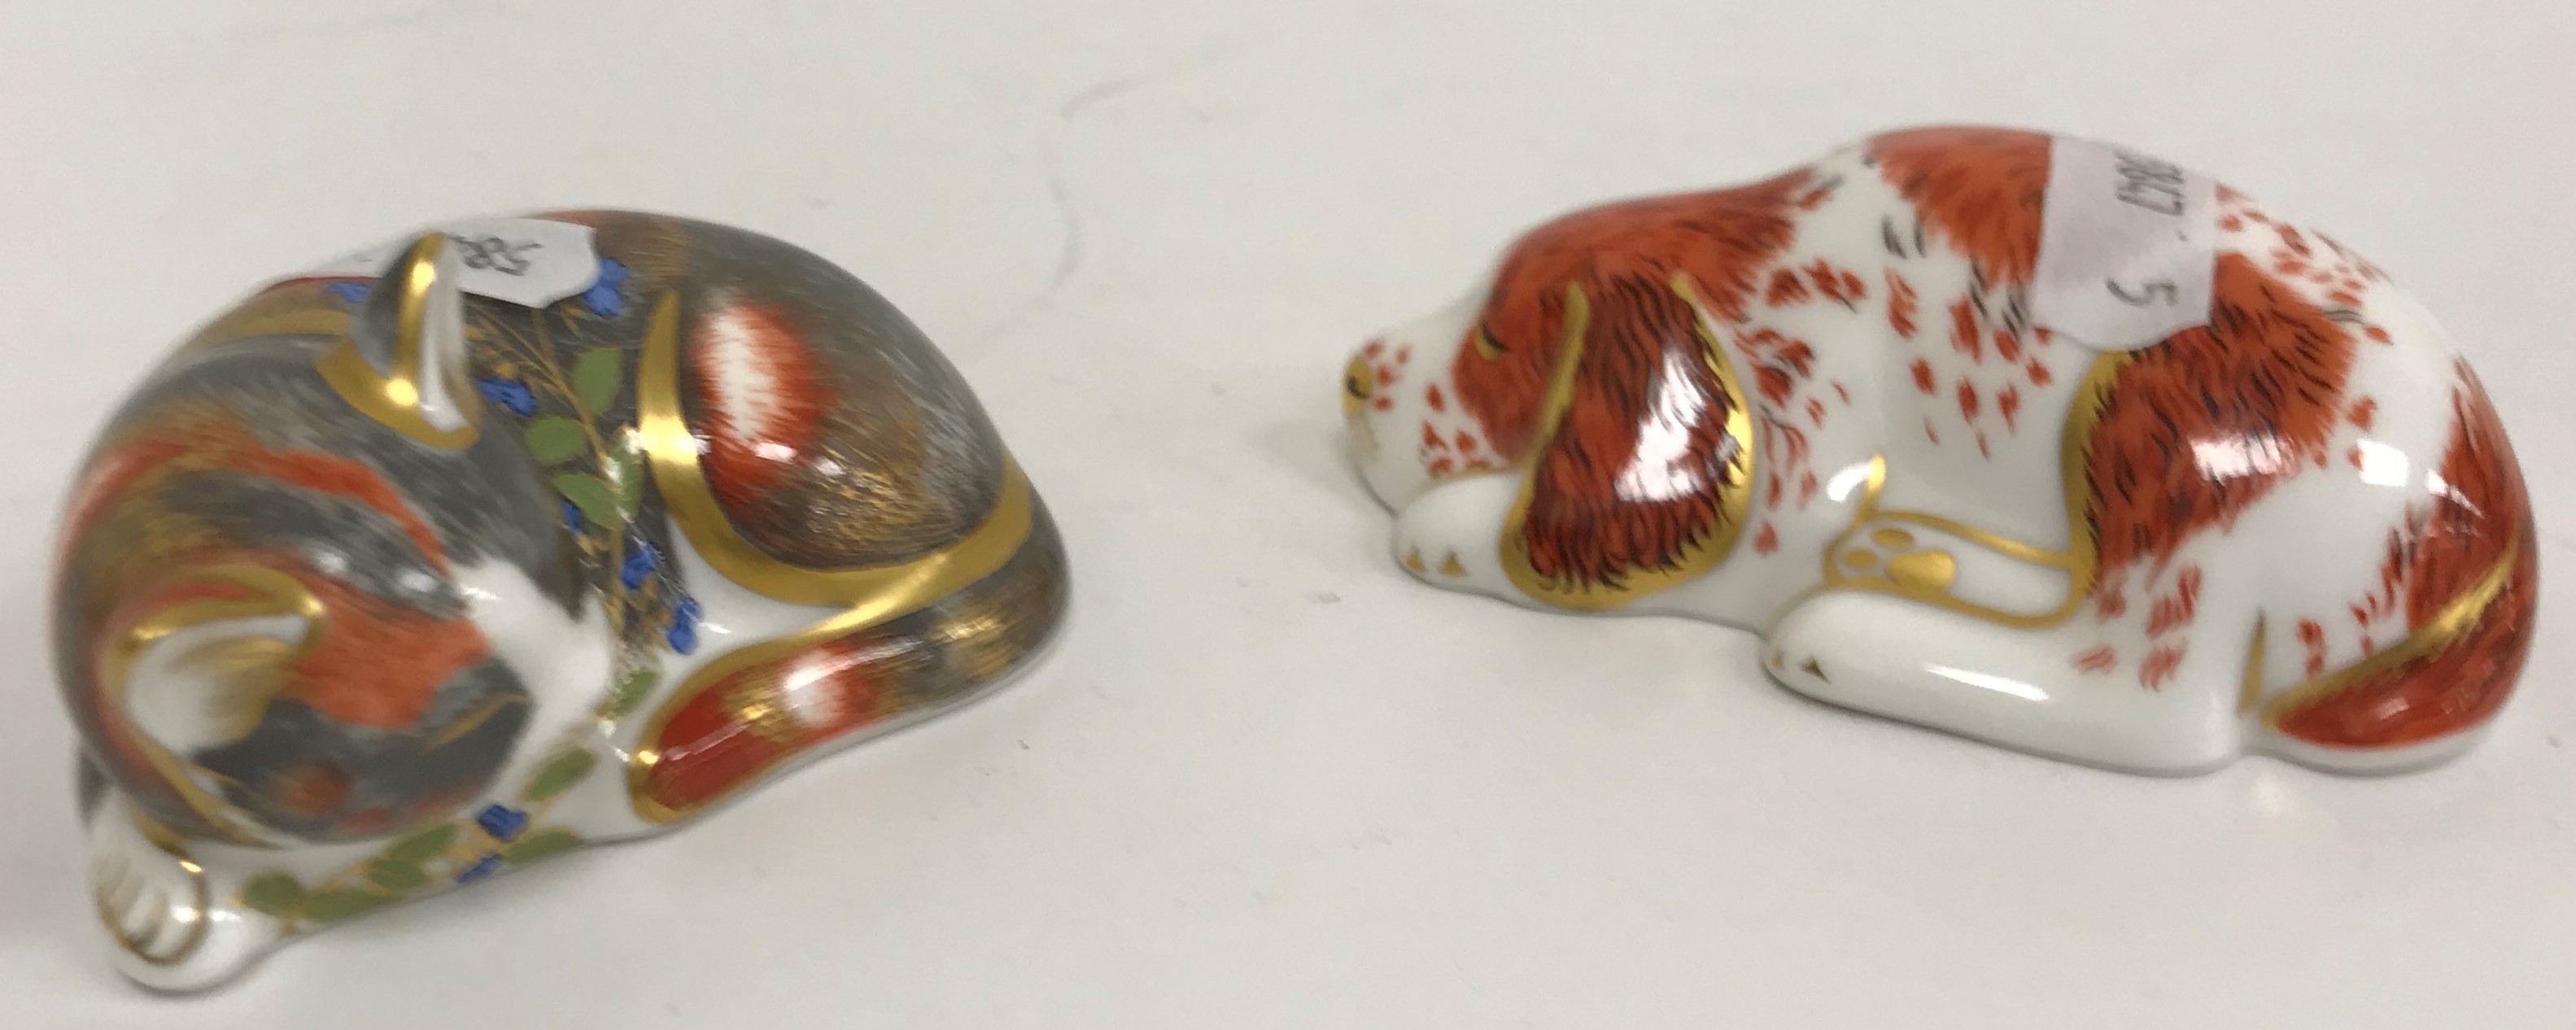 Two Royal Crown Derby figures including Collectors' Guild Exclusive "Catnip kitten" and Collectors'